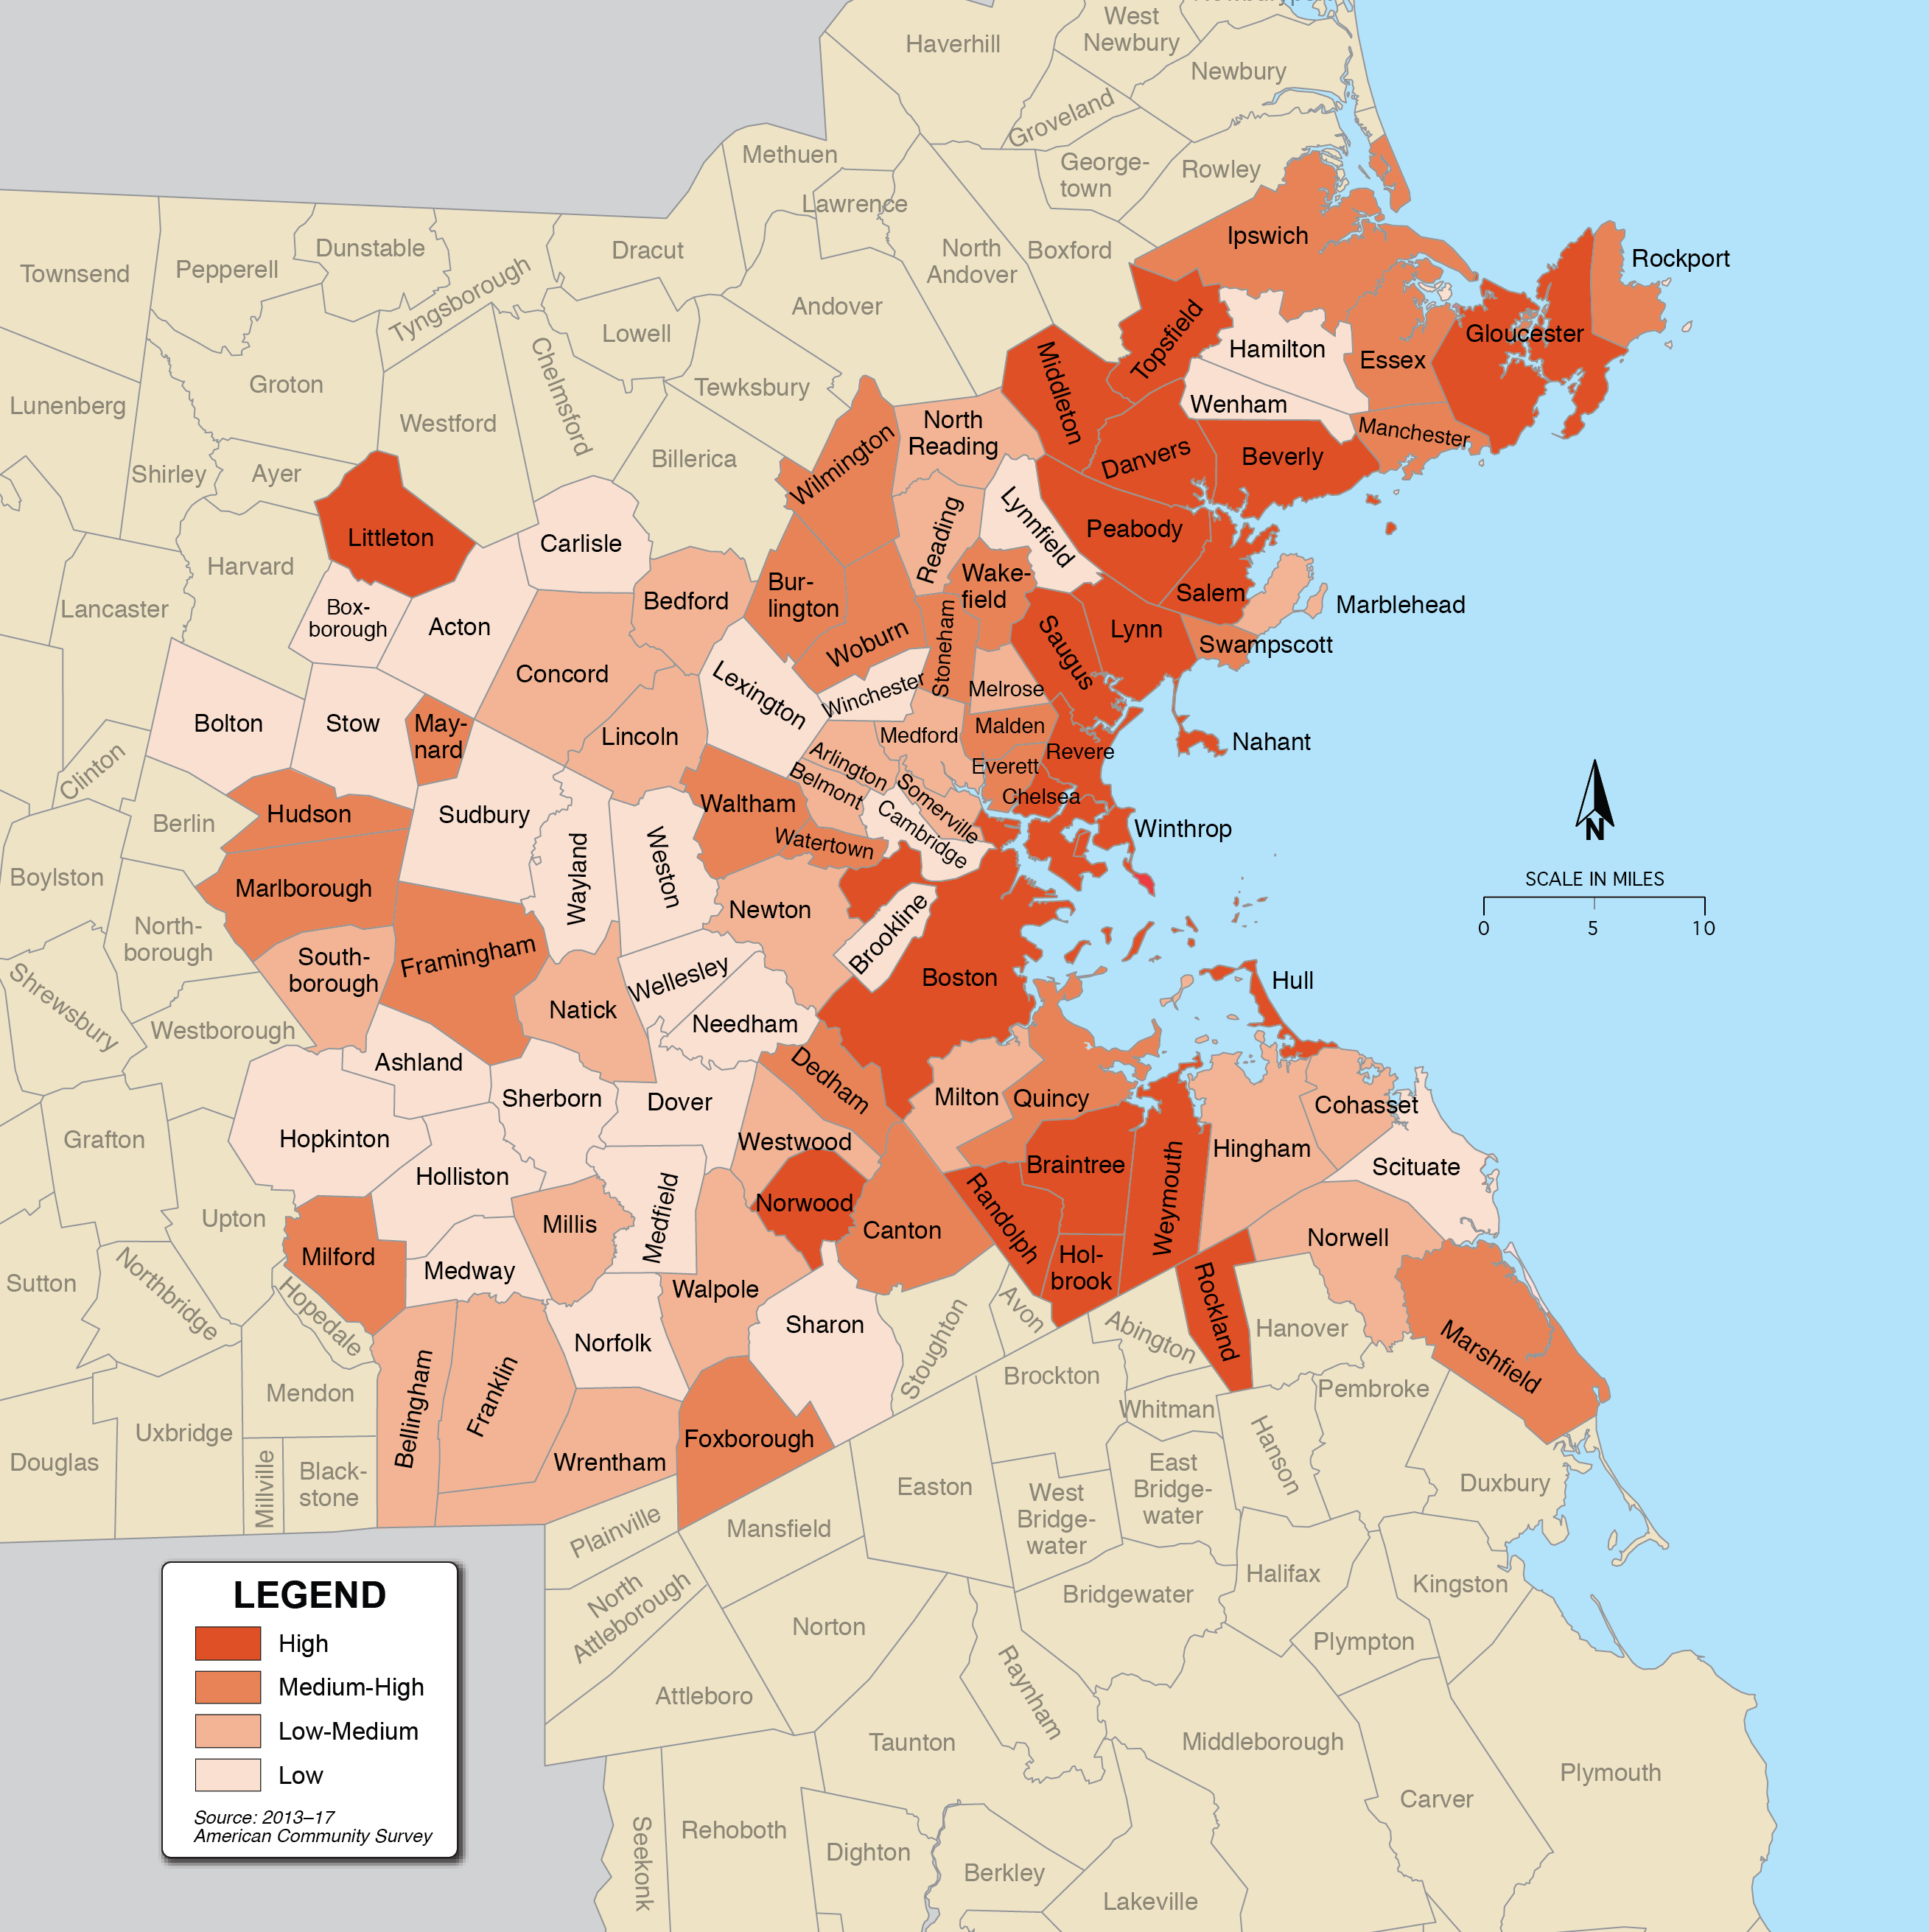 This map shows the share of the population with a disability in the Boston region by municipality.